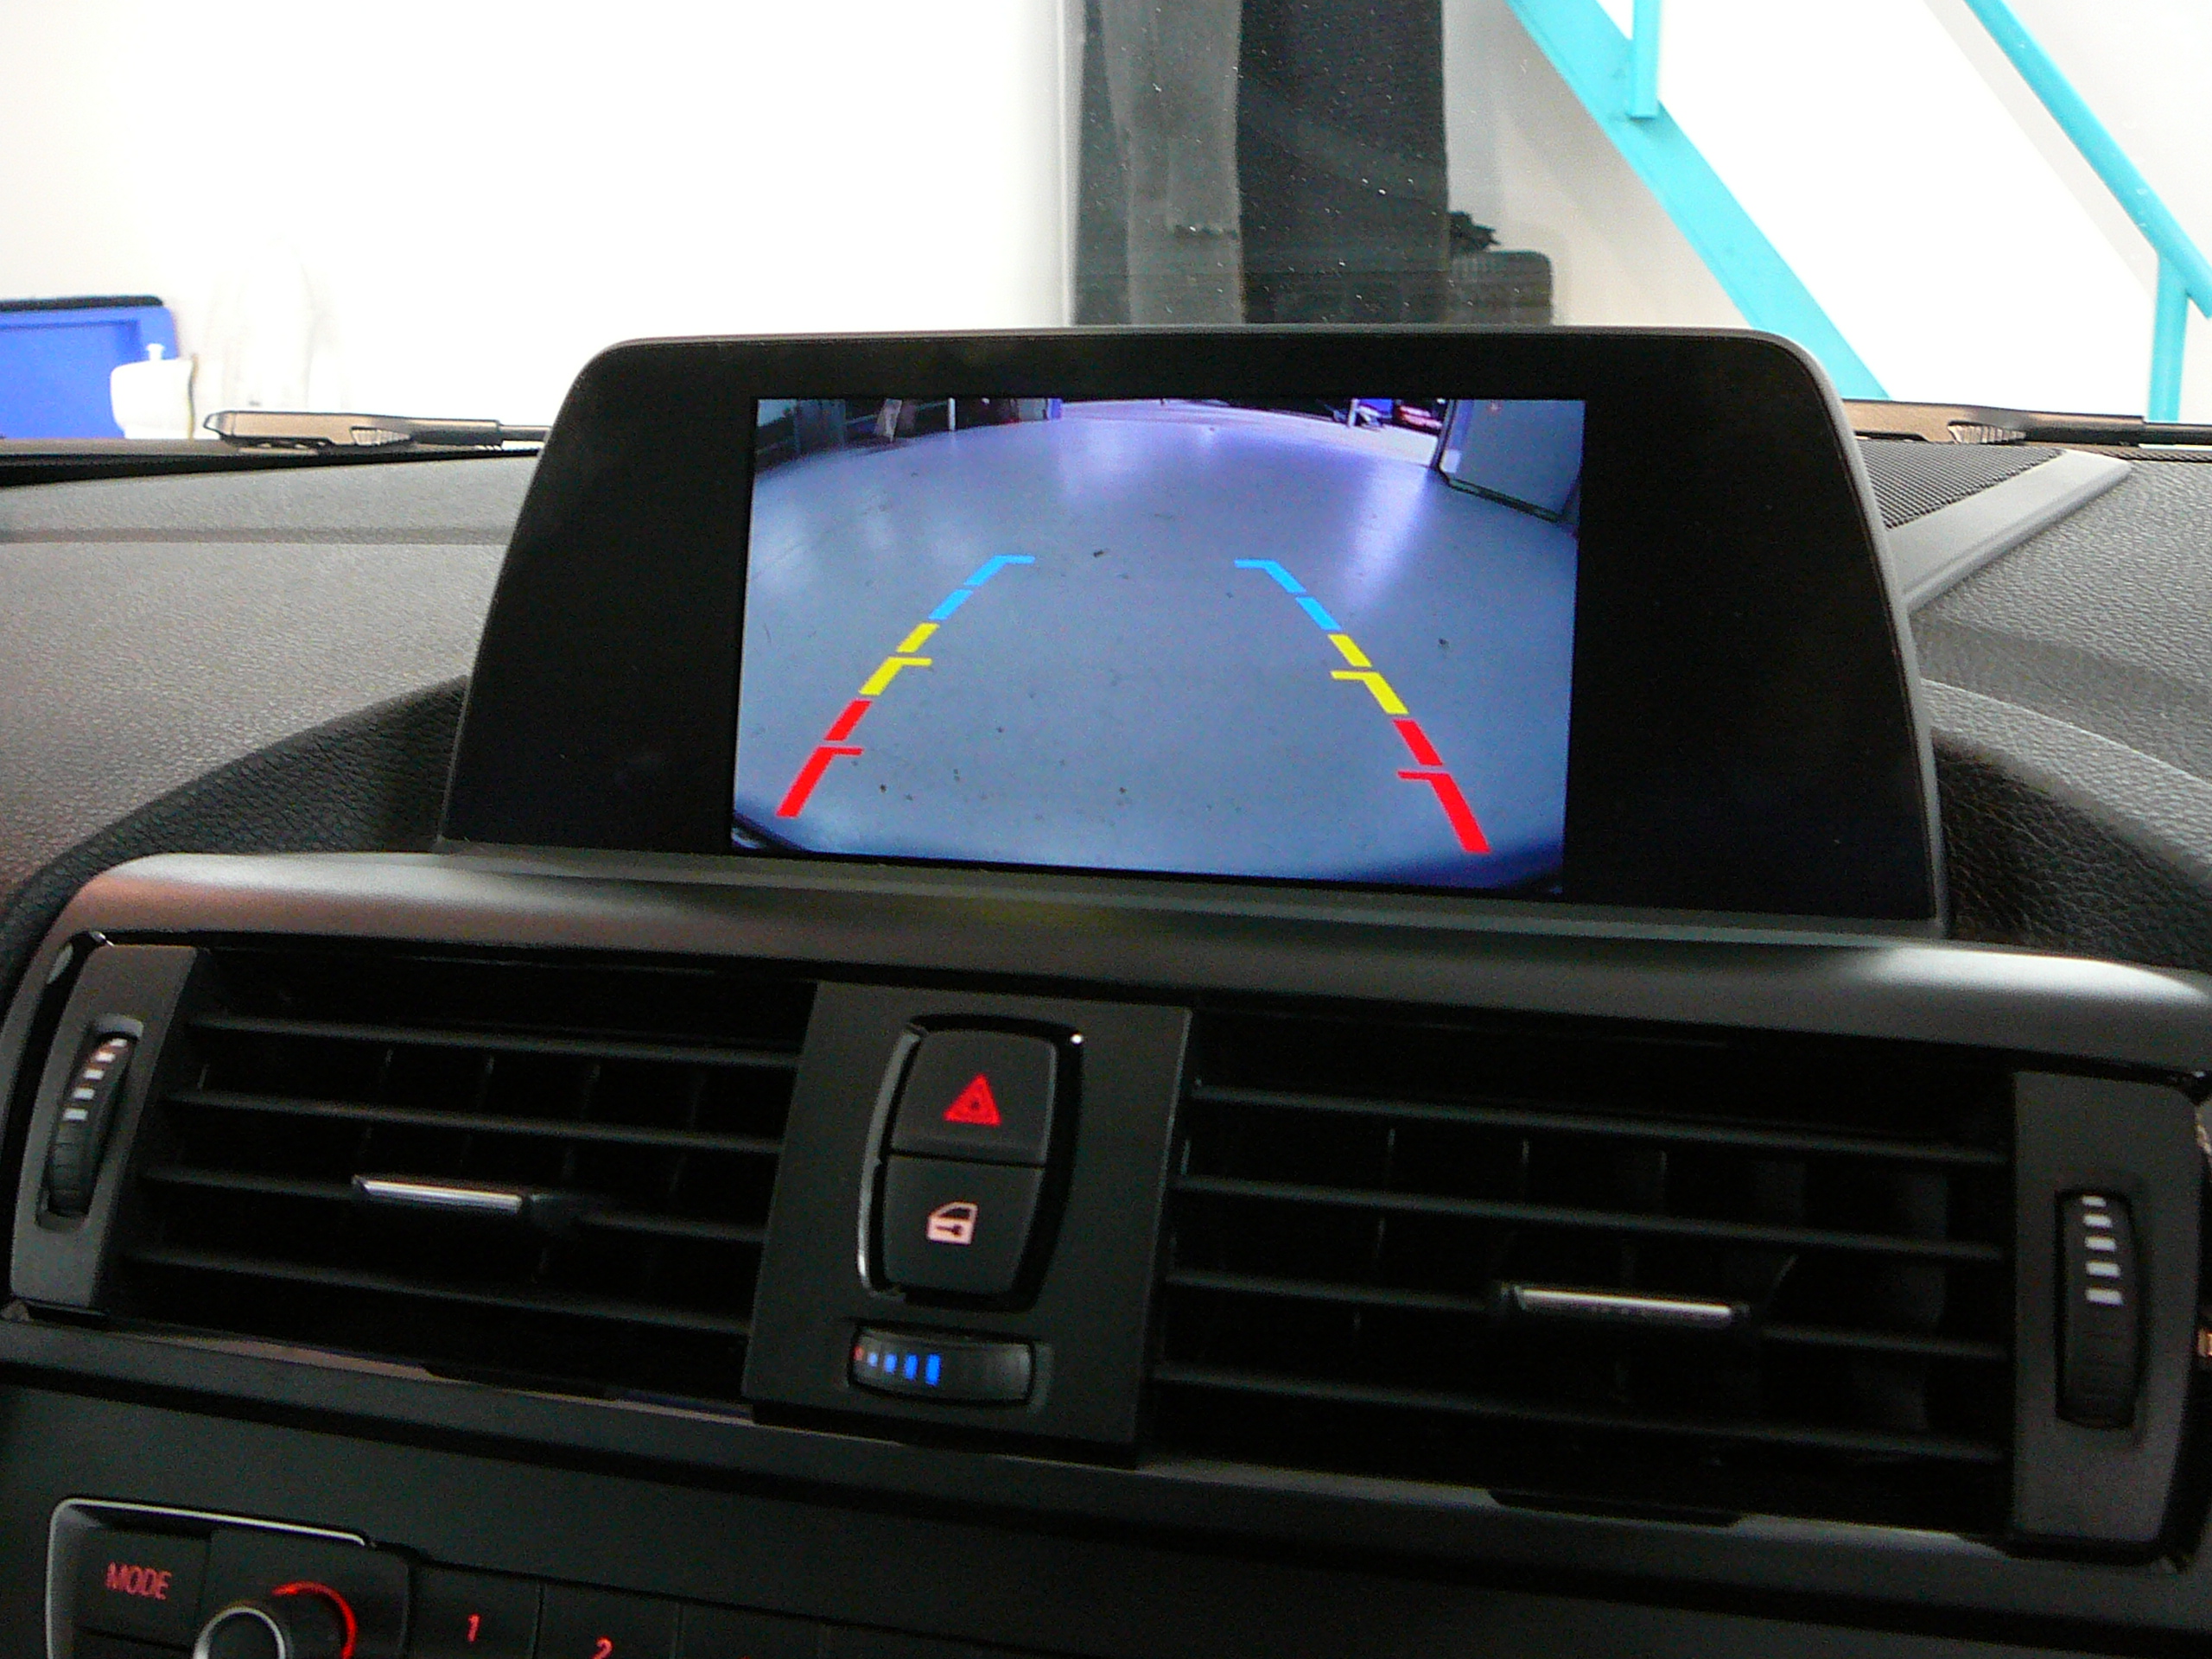 BMW M135 2013, Reverse Camera System on the BMW Factory Screen